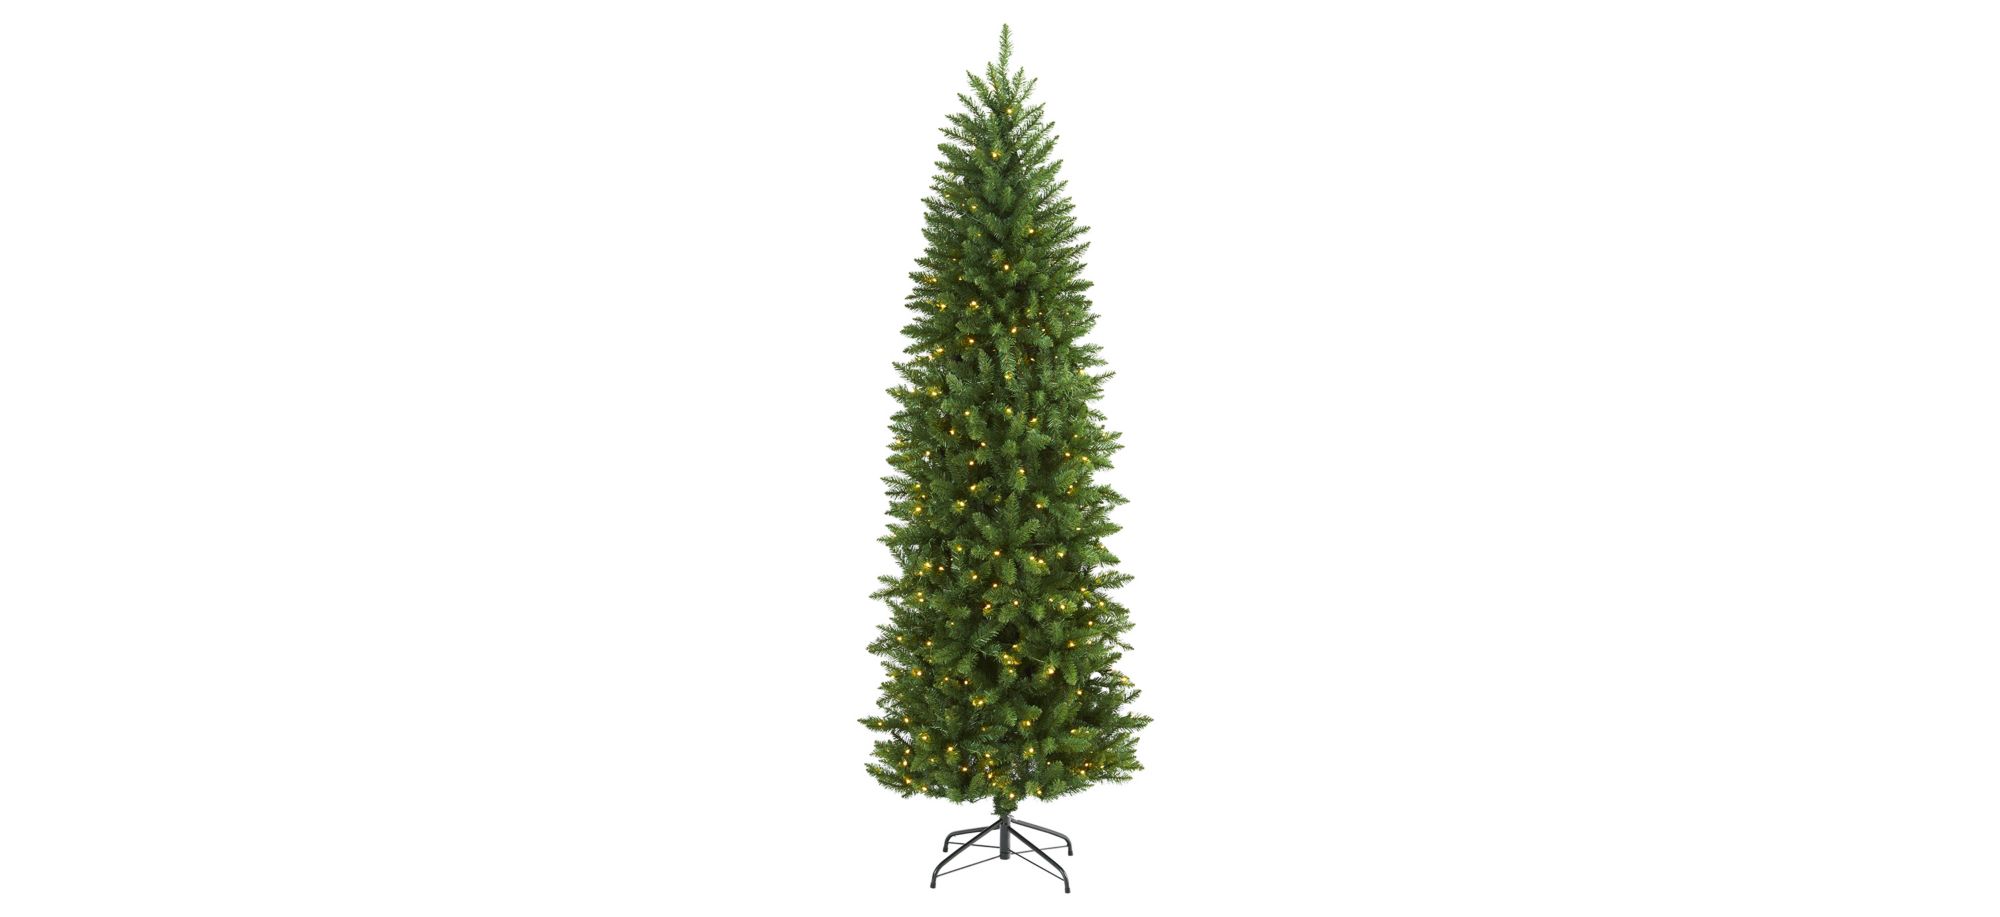 6.5ft. Pre-Lit Slim Green Mountain Pine Artificial Christmas Tree in Green by Bellanest